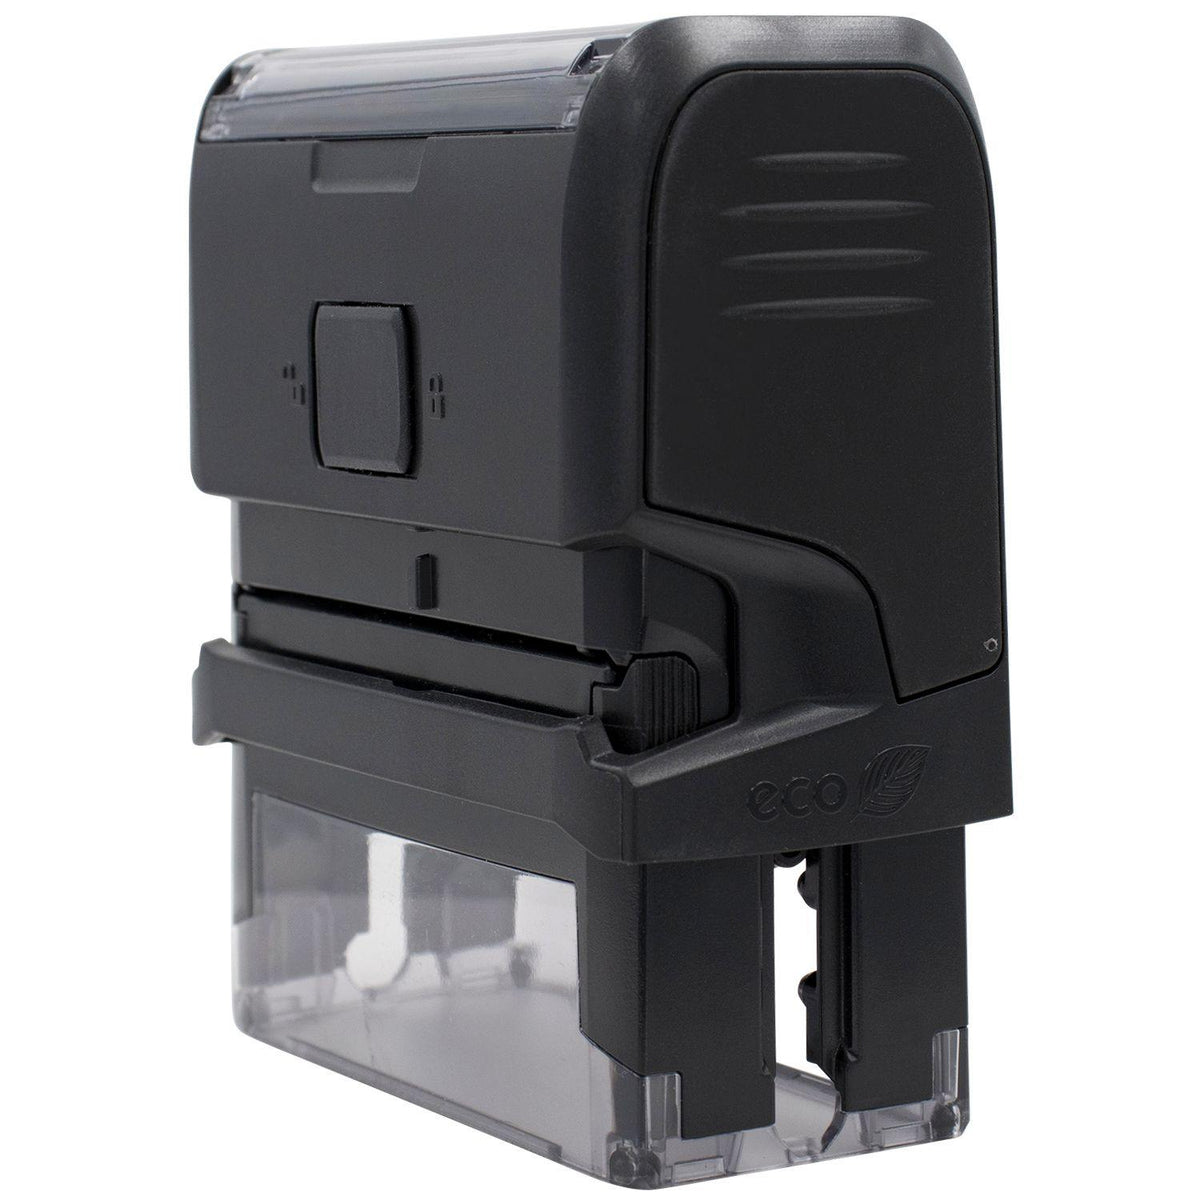 Self-Inking Self-Quarantine Stamp - Engineer Seal Stamps - Brand_Trodat, Impression Size_Small, Stamp Type_Self-Inking Stamp, Type of Use_Medical Office